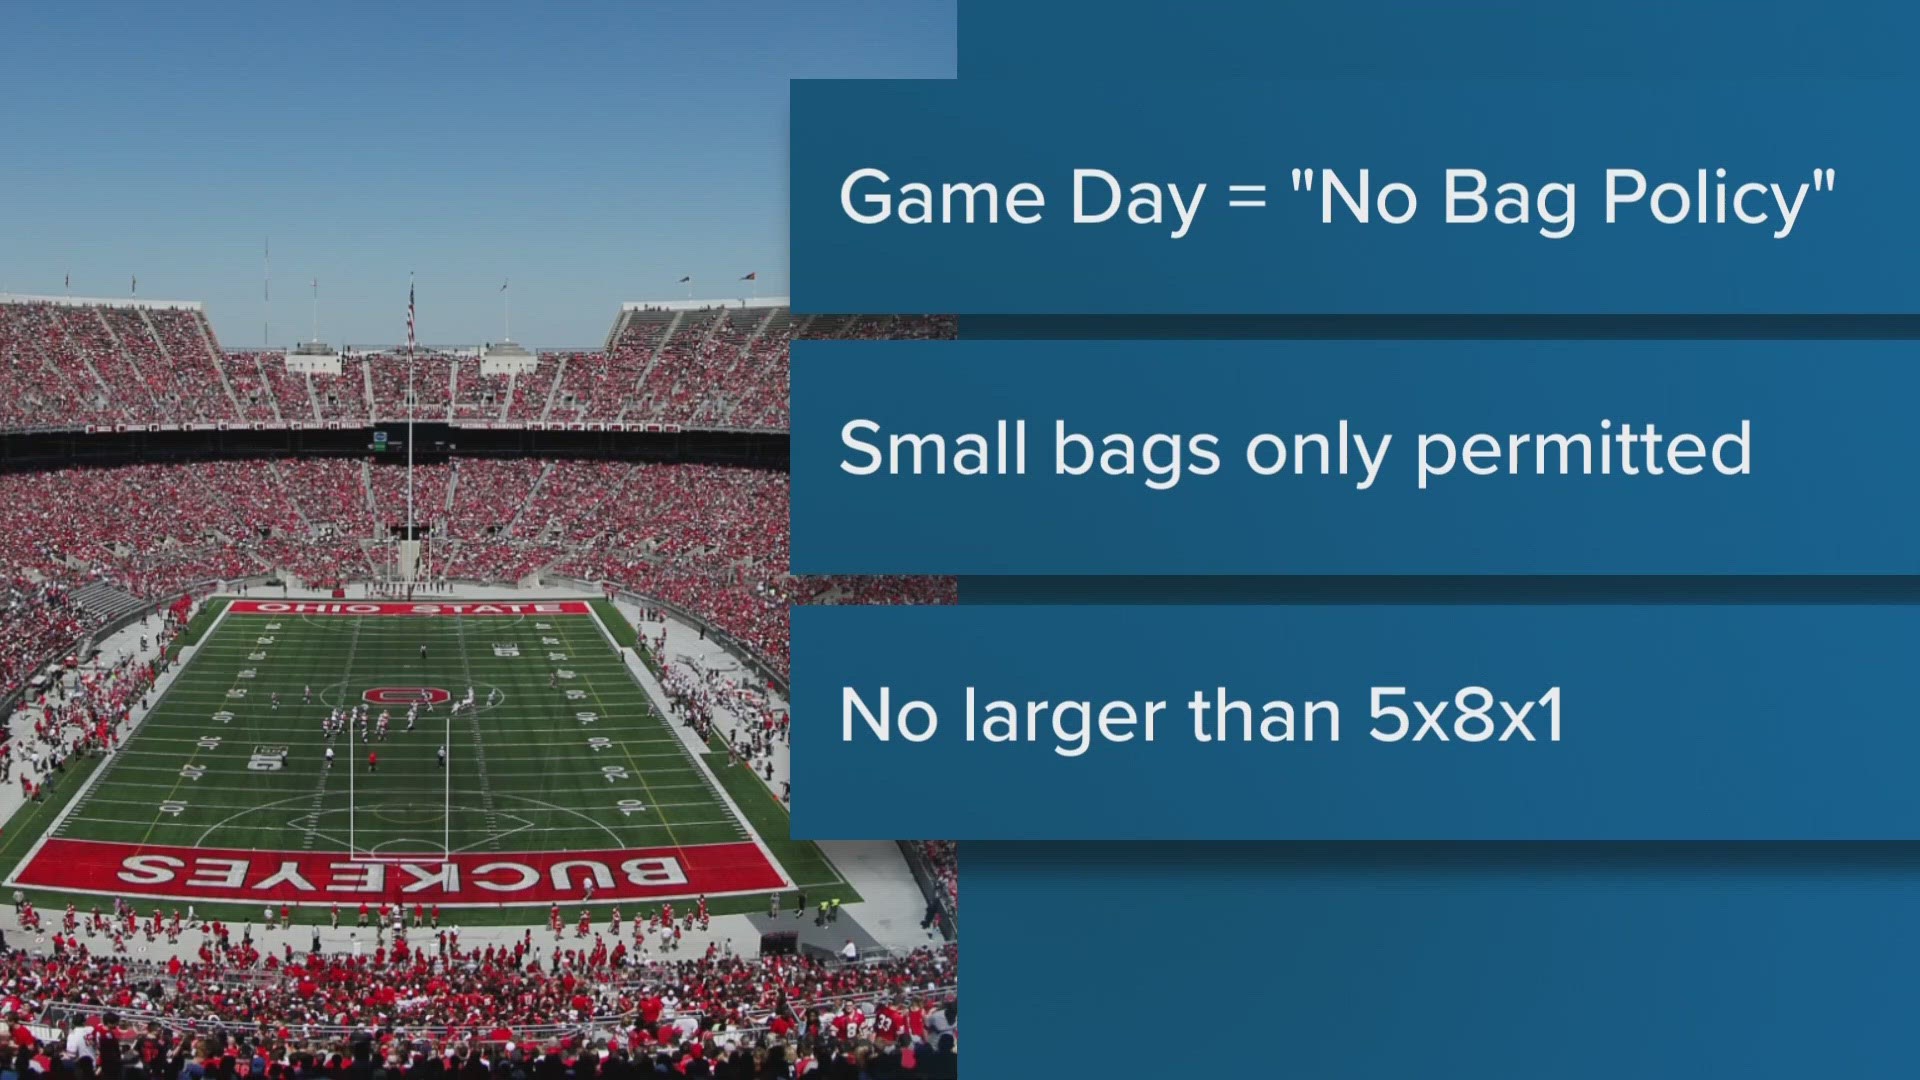 While most of the procedures are the same when it comes to attending an Ohio State football game, there are a few changes for fans to note.